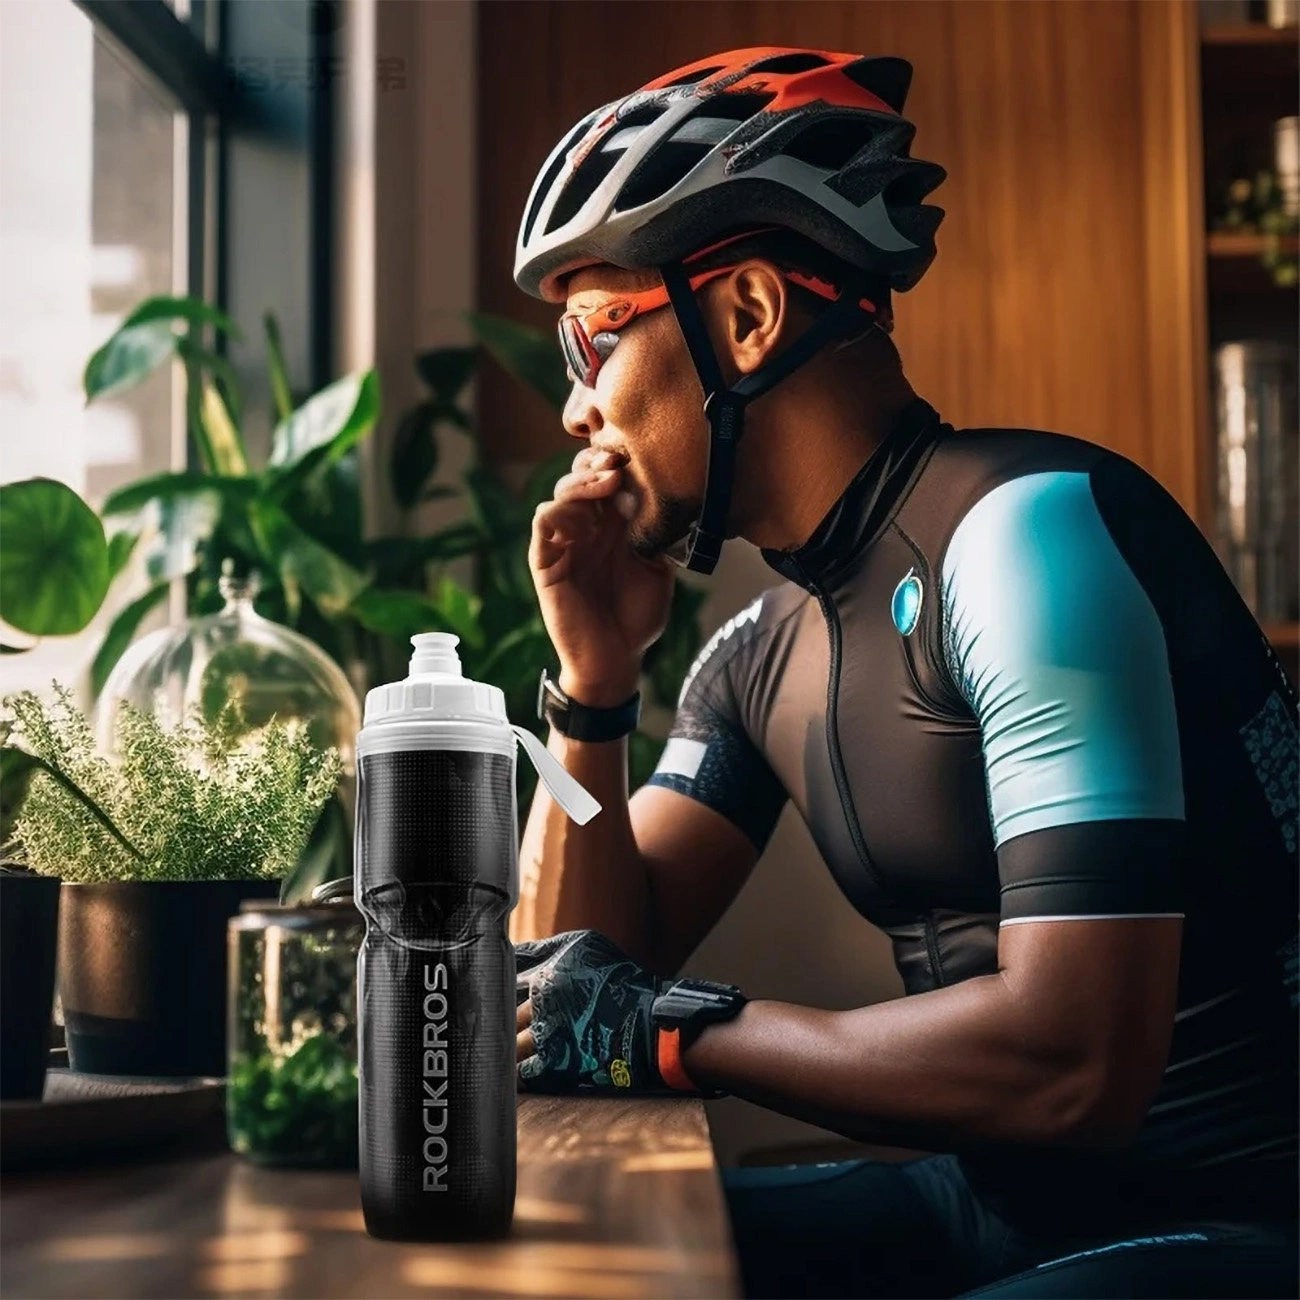 A man in cycling clothes and a helmet sitting by the window, on the table nearby there is a Rockbros bicycle bottle 35210019001